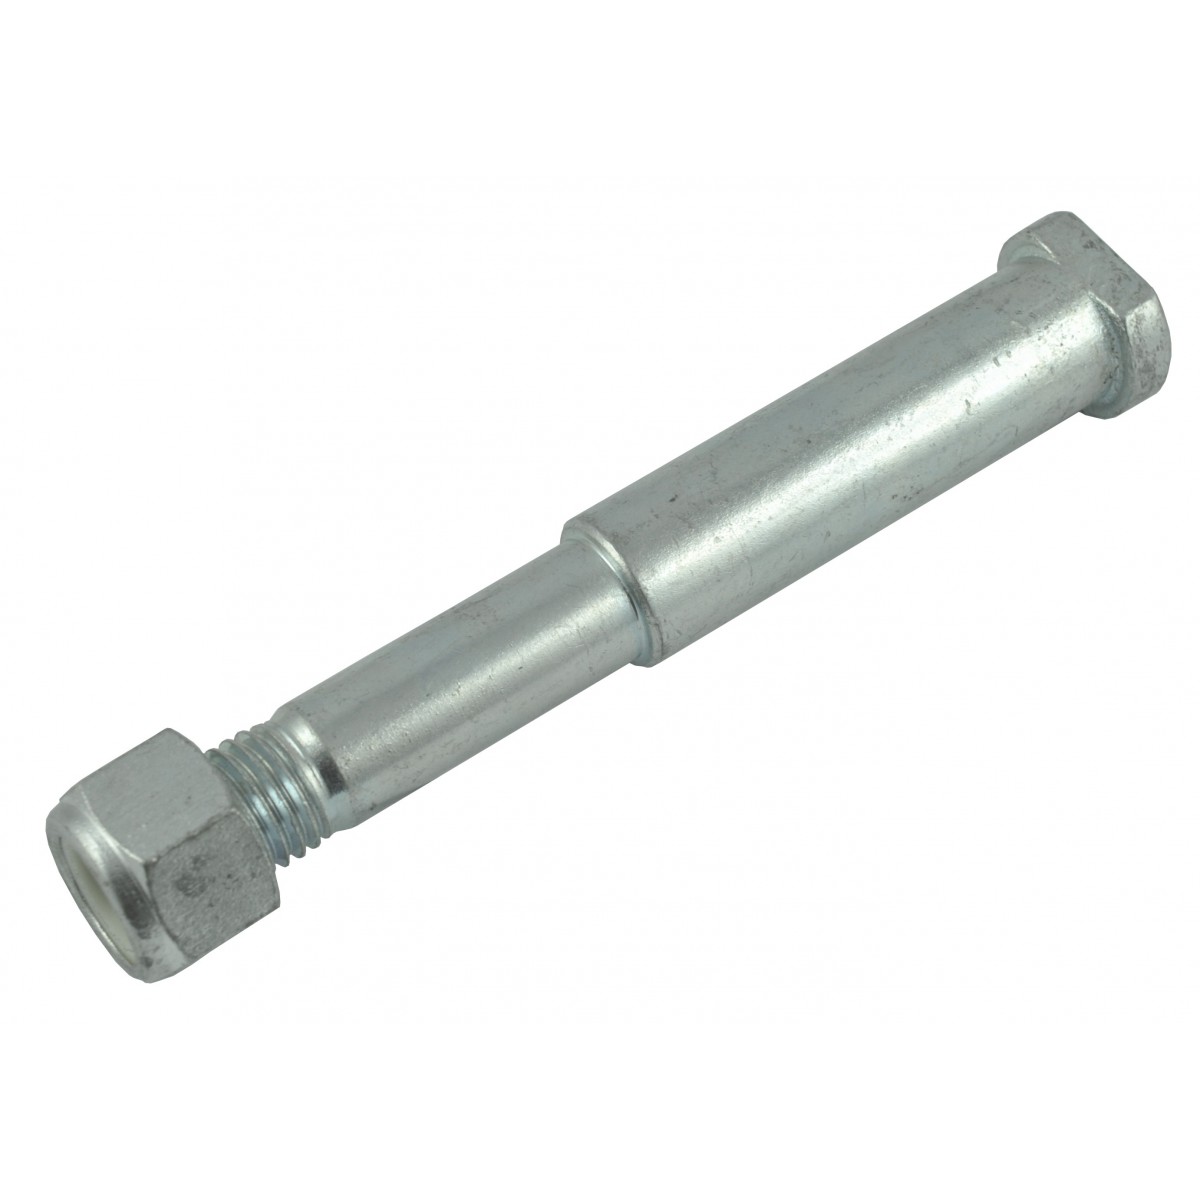 Bolt with thread and nut 212 x 30 x 24 mm